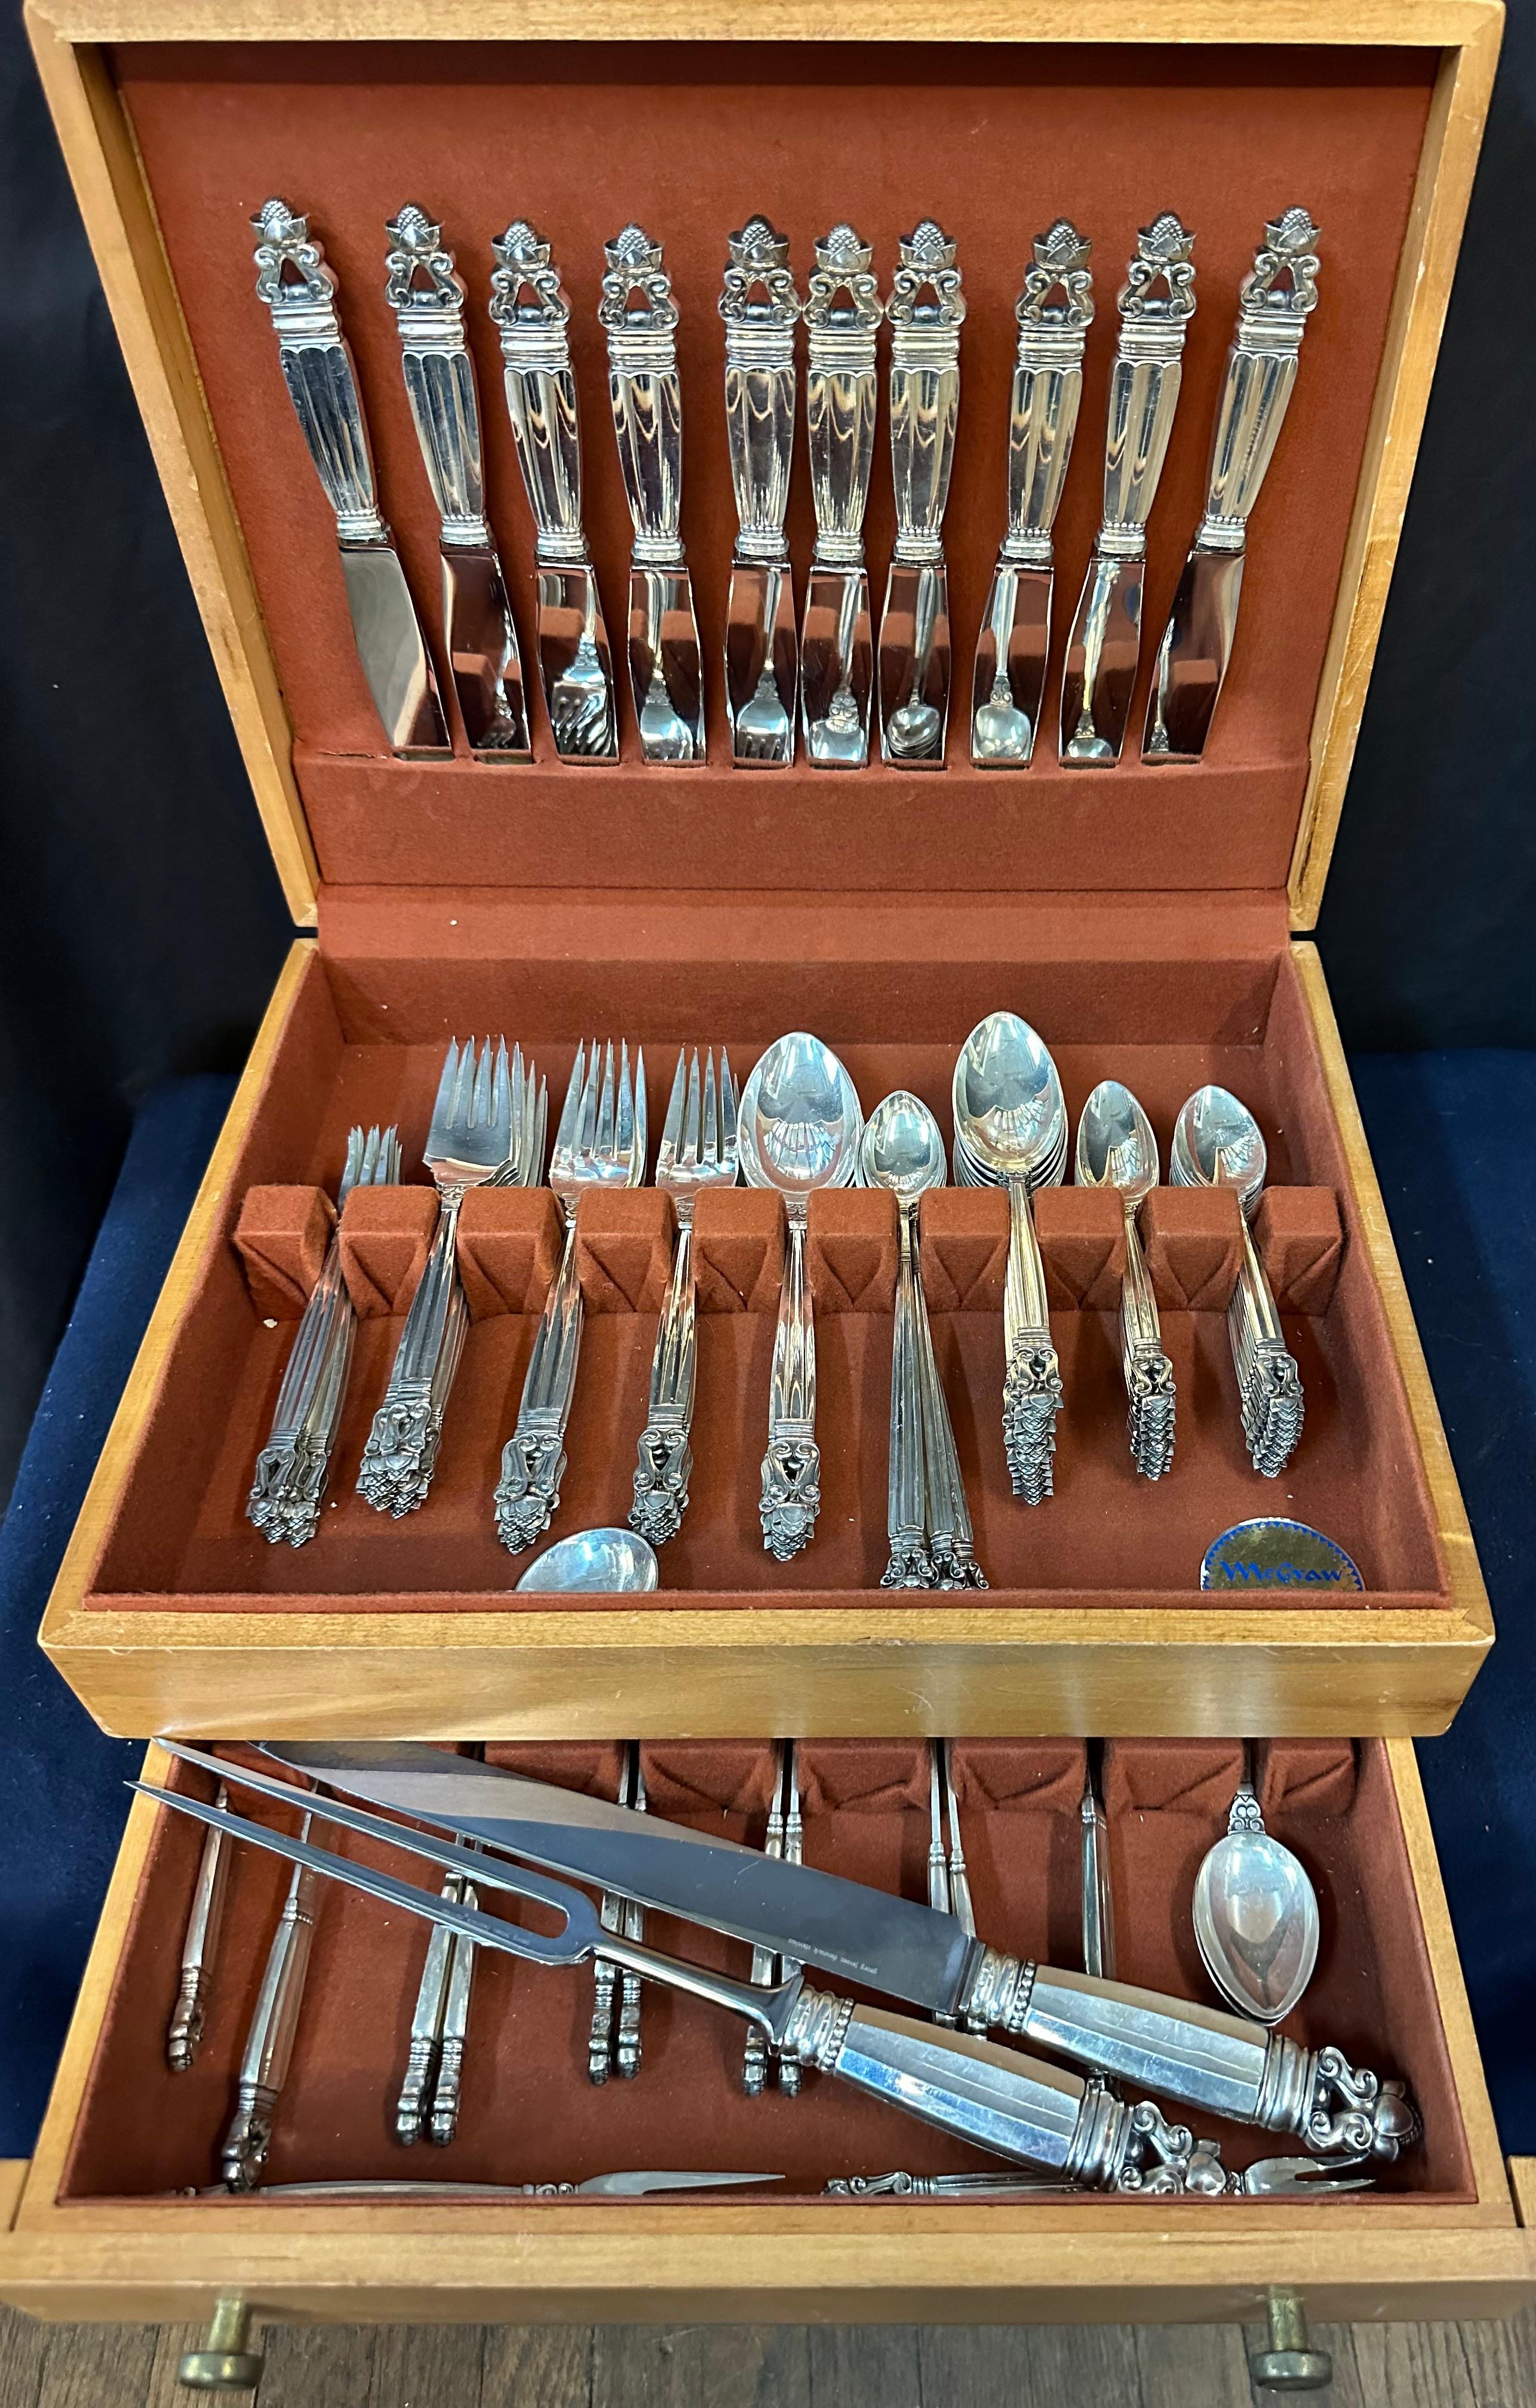 This stylish sterling silver flatware service for ten is designed in the Acorn pattern. It was produced by Georg Jensen & is circa 1917.
The flatware set of ninety three pieces weighs 118.5 ounces. It is assembled in a wood box & includes:
10 dinner